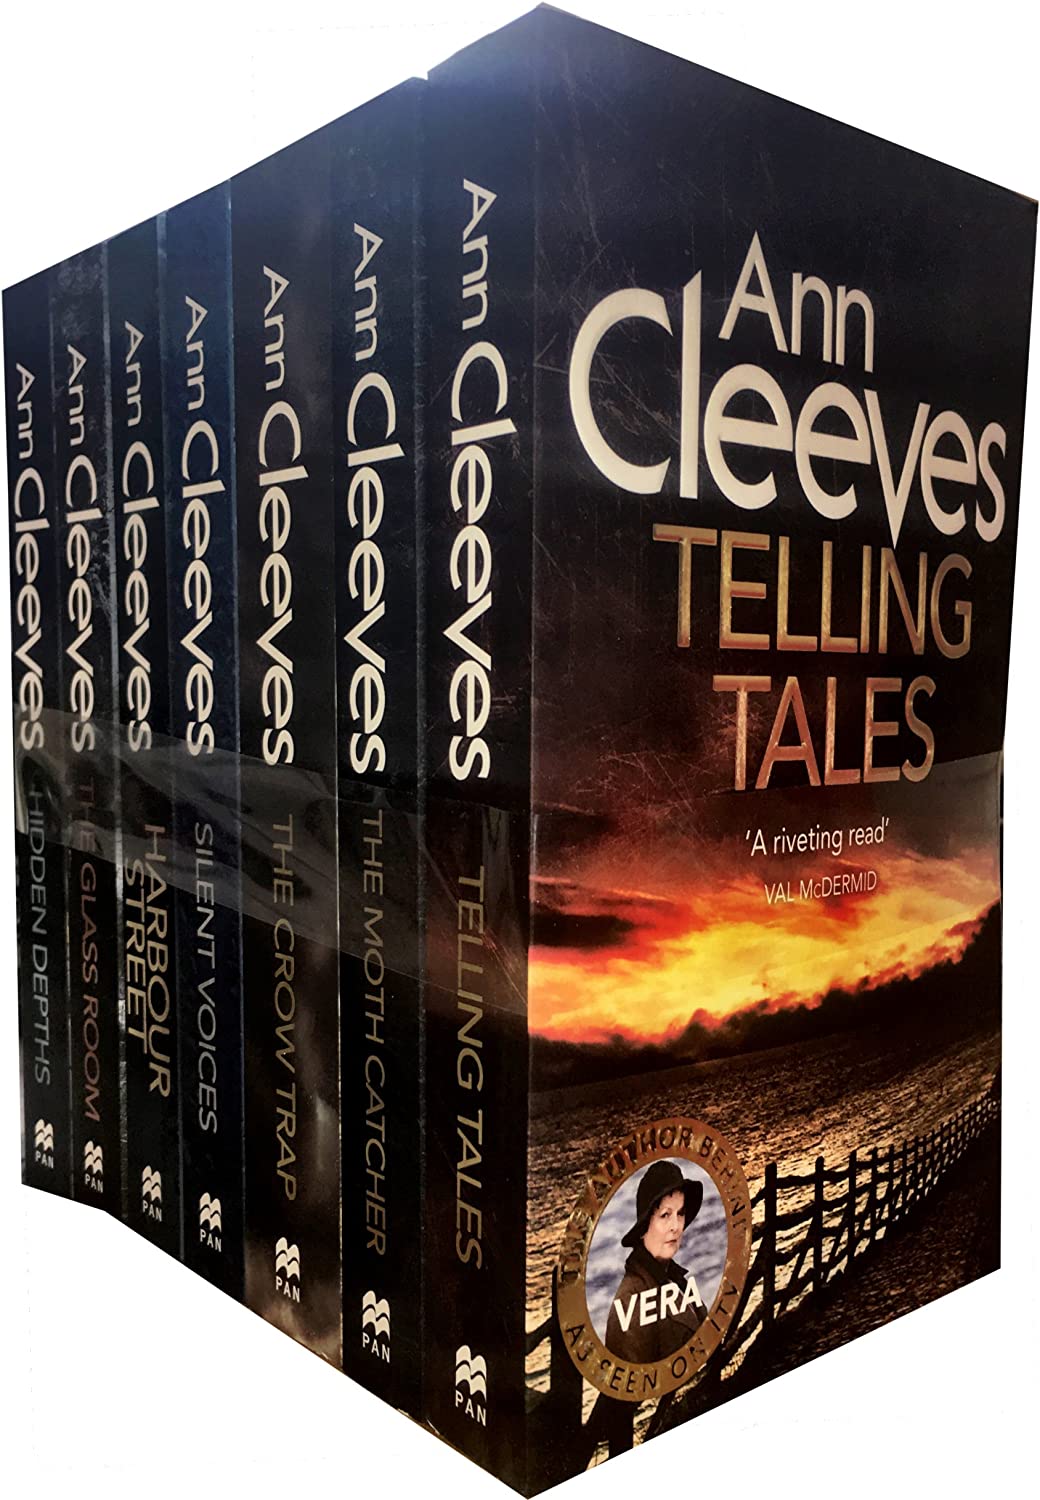 Ann Cleeves TV Vera Stanhope Series Collection 7 Books Set Telling Tales Paperback - Lets Buy Books